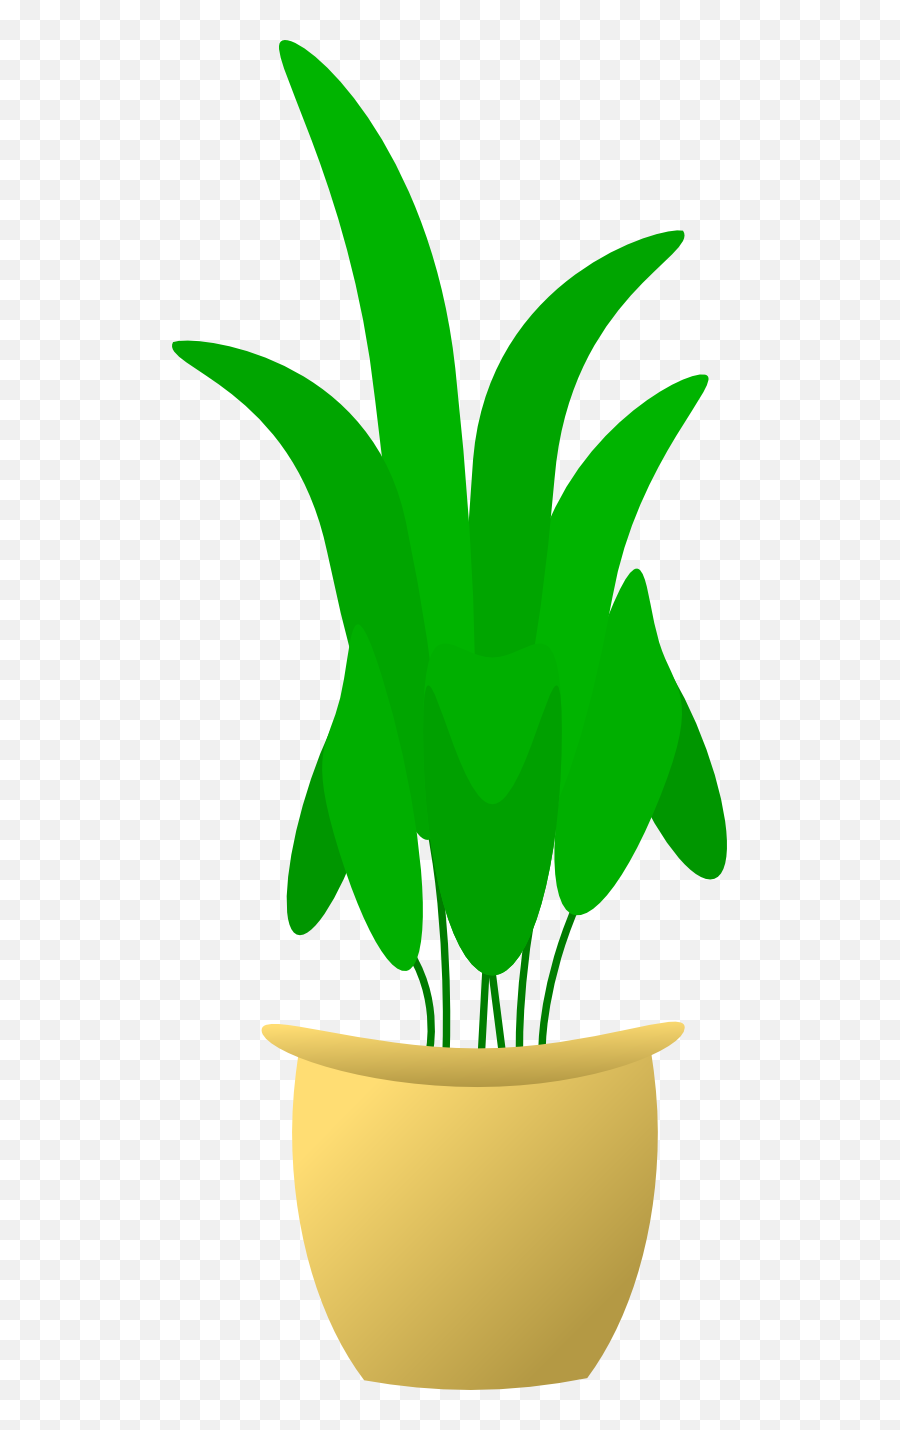 Plant In Pot Clipart I2clipart - Royalty Free Public Plant Cartoon Emoji,Weed Emoticons For Facebook